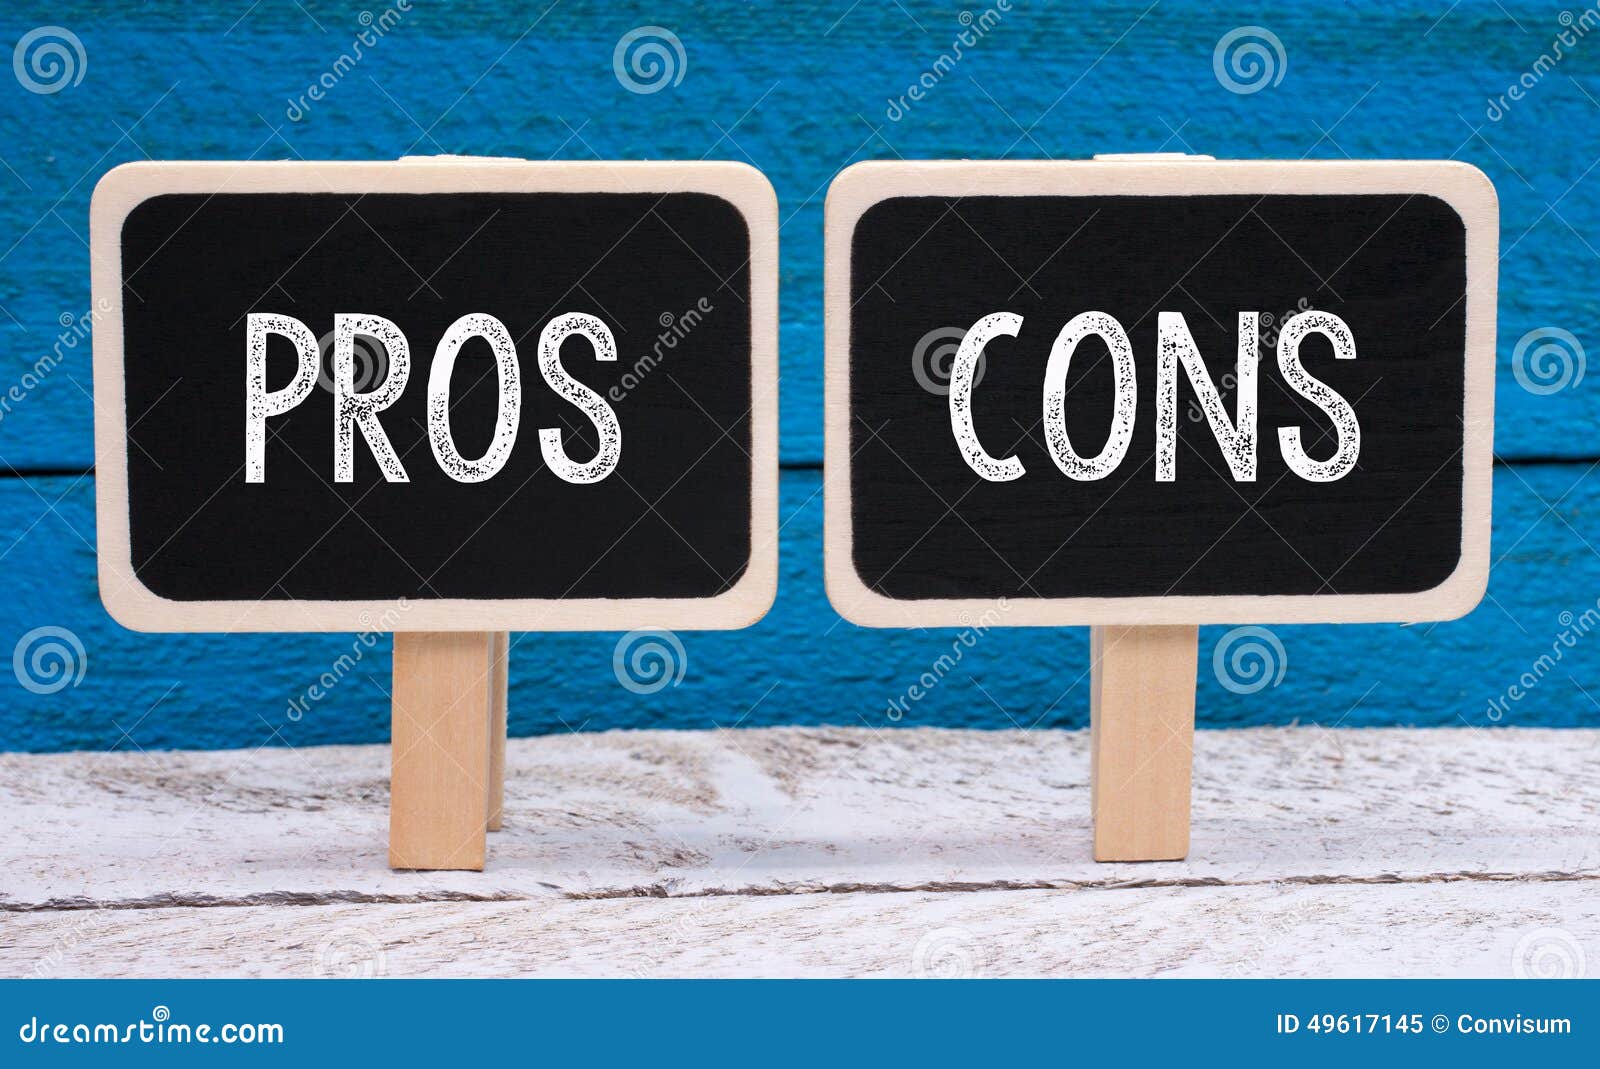 Pros And Cons Stock Image Image Of Cons Blue Boards 49617145